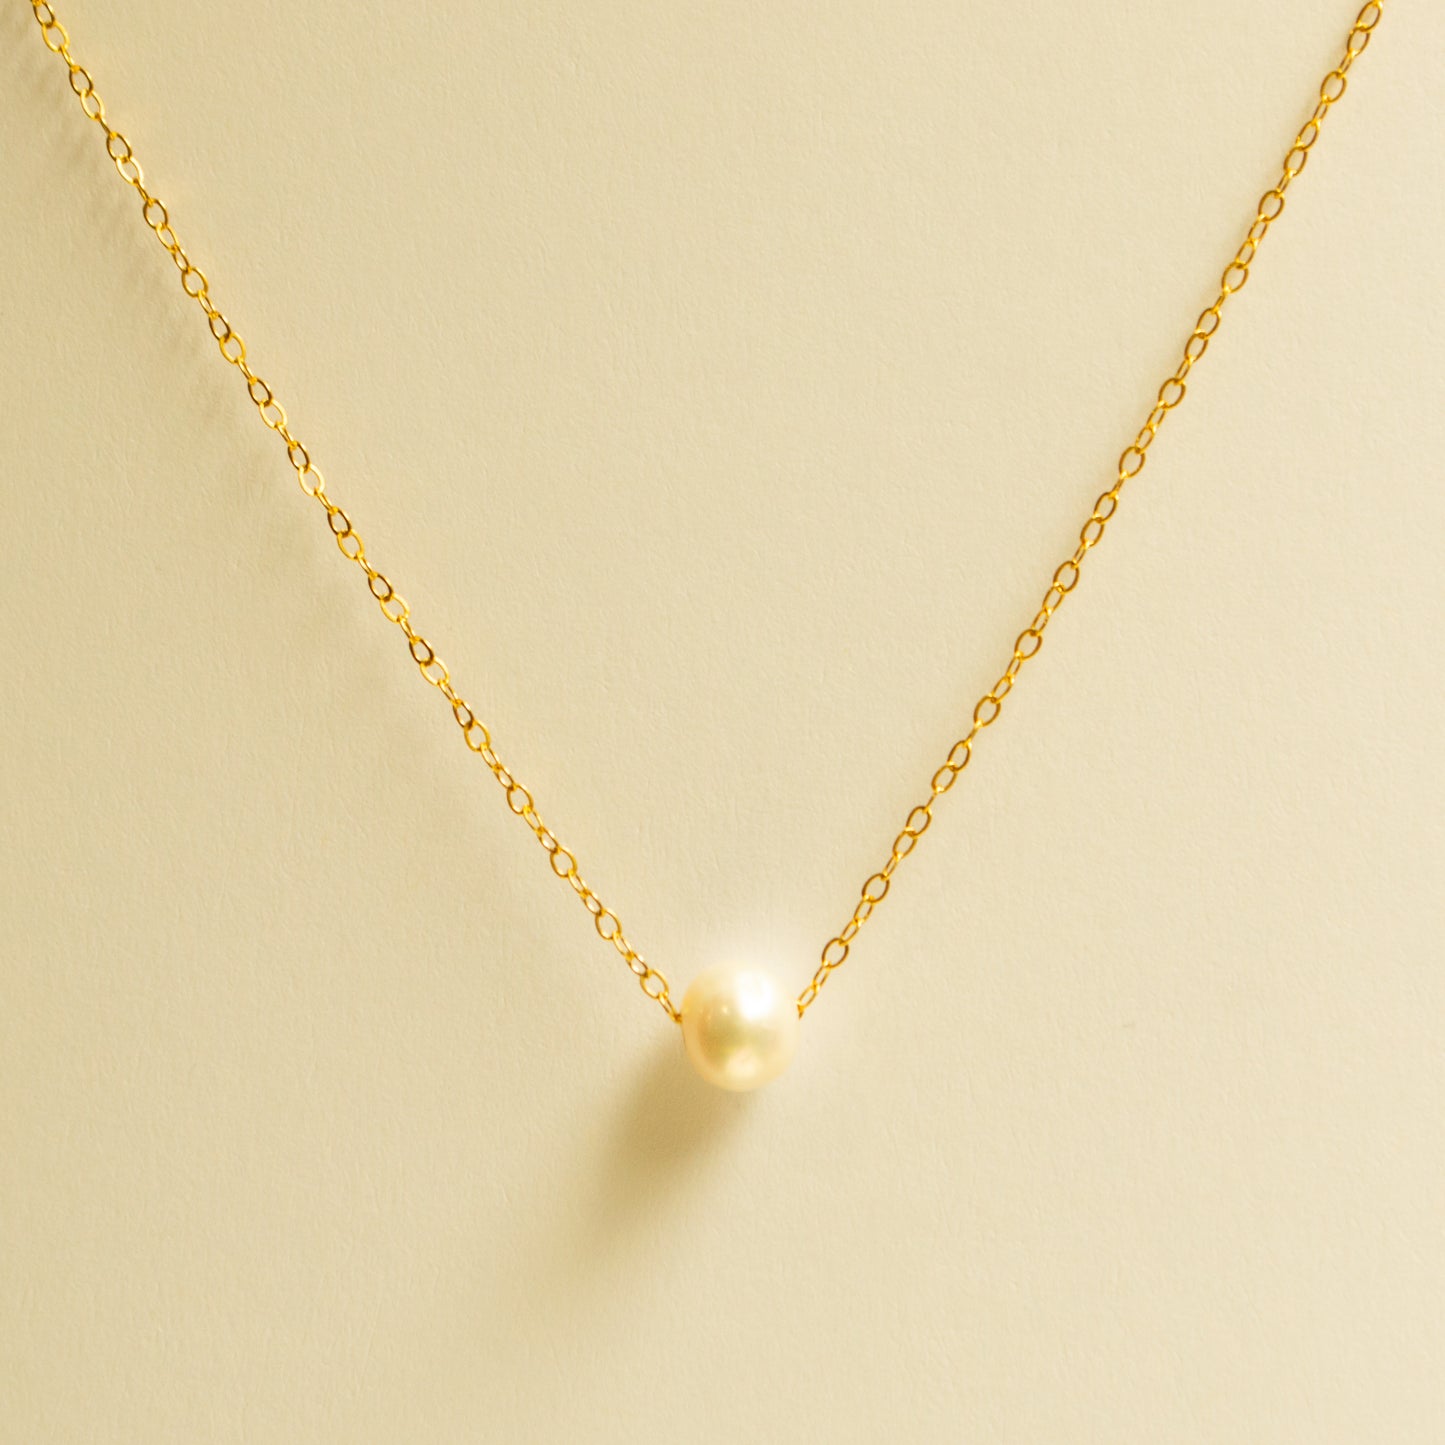 Sliding Pearl Necklace